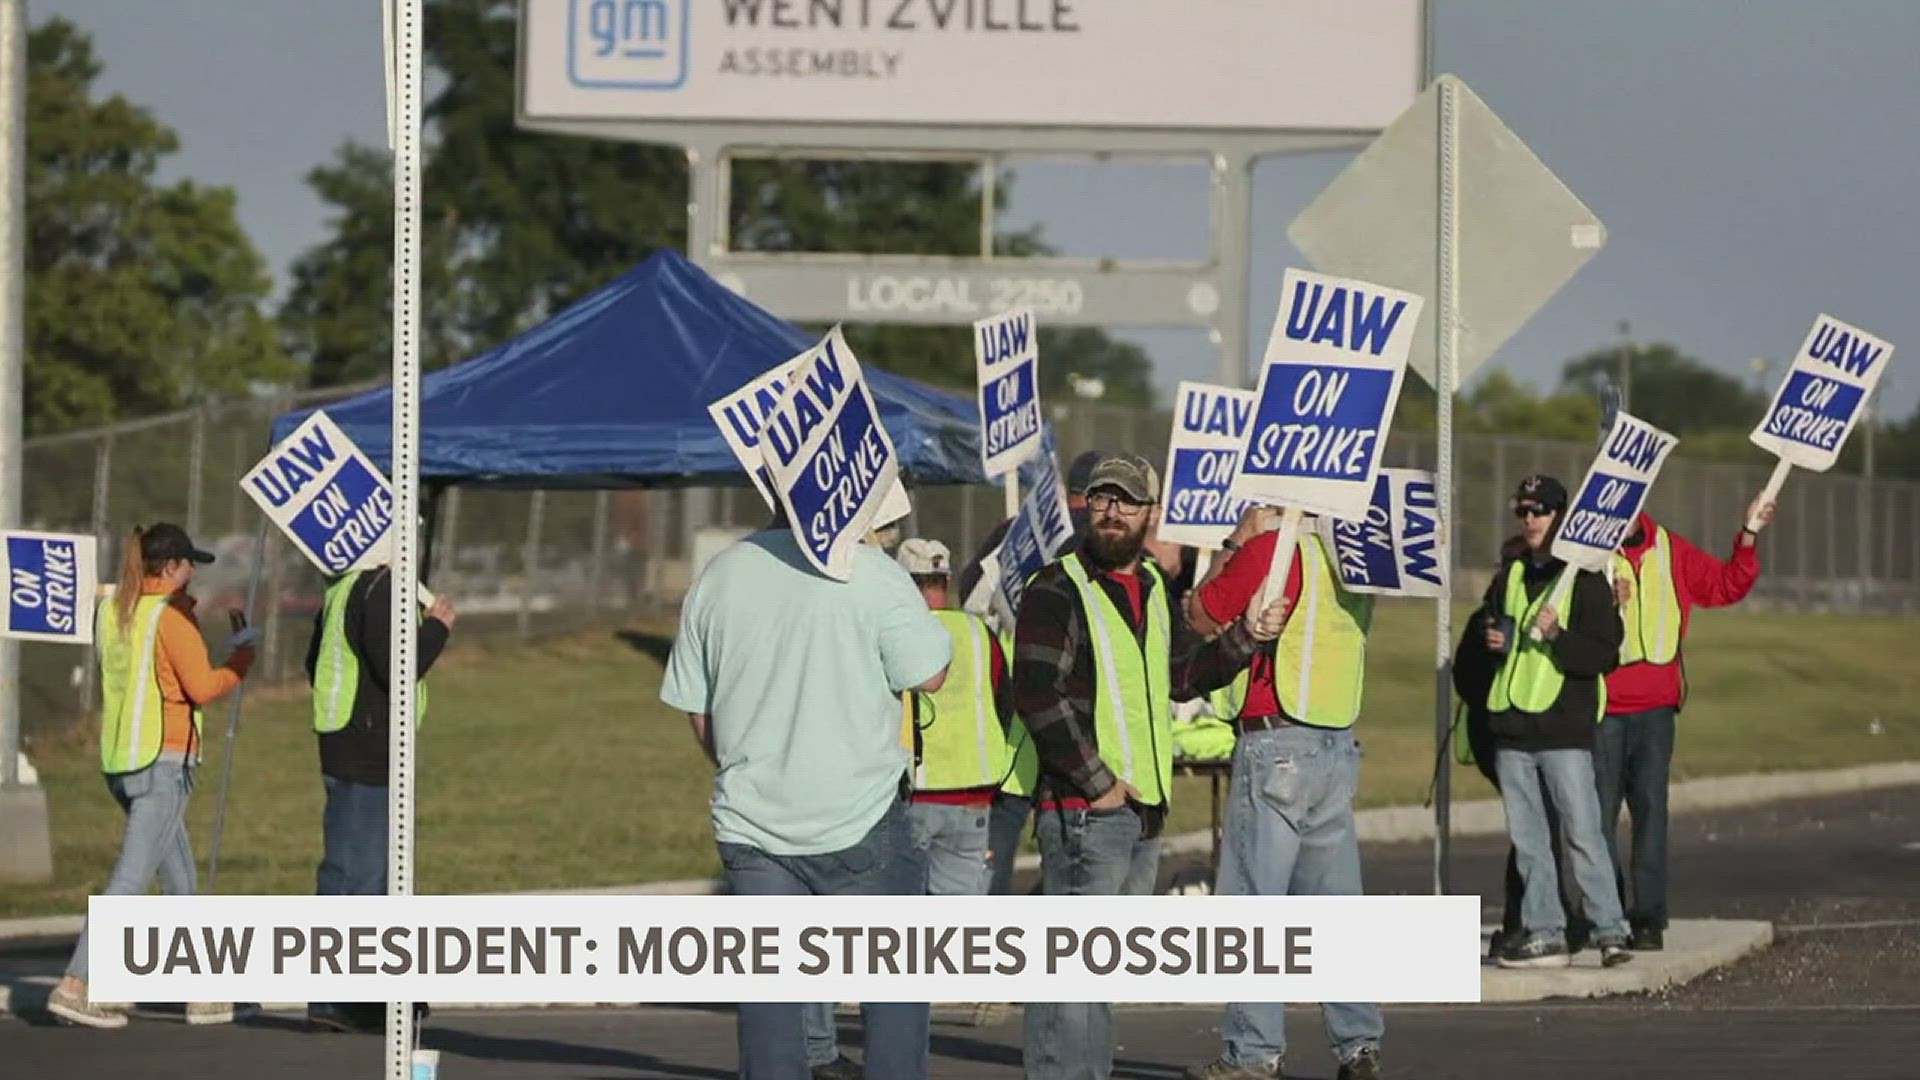 For striking union workers they're unsure how long the strike will last, but maintain their belief in raising wage and improving pension benefits.